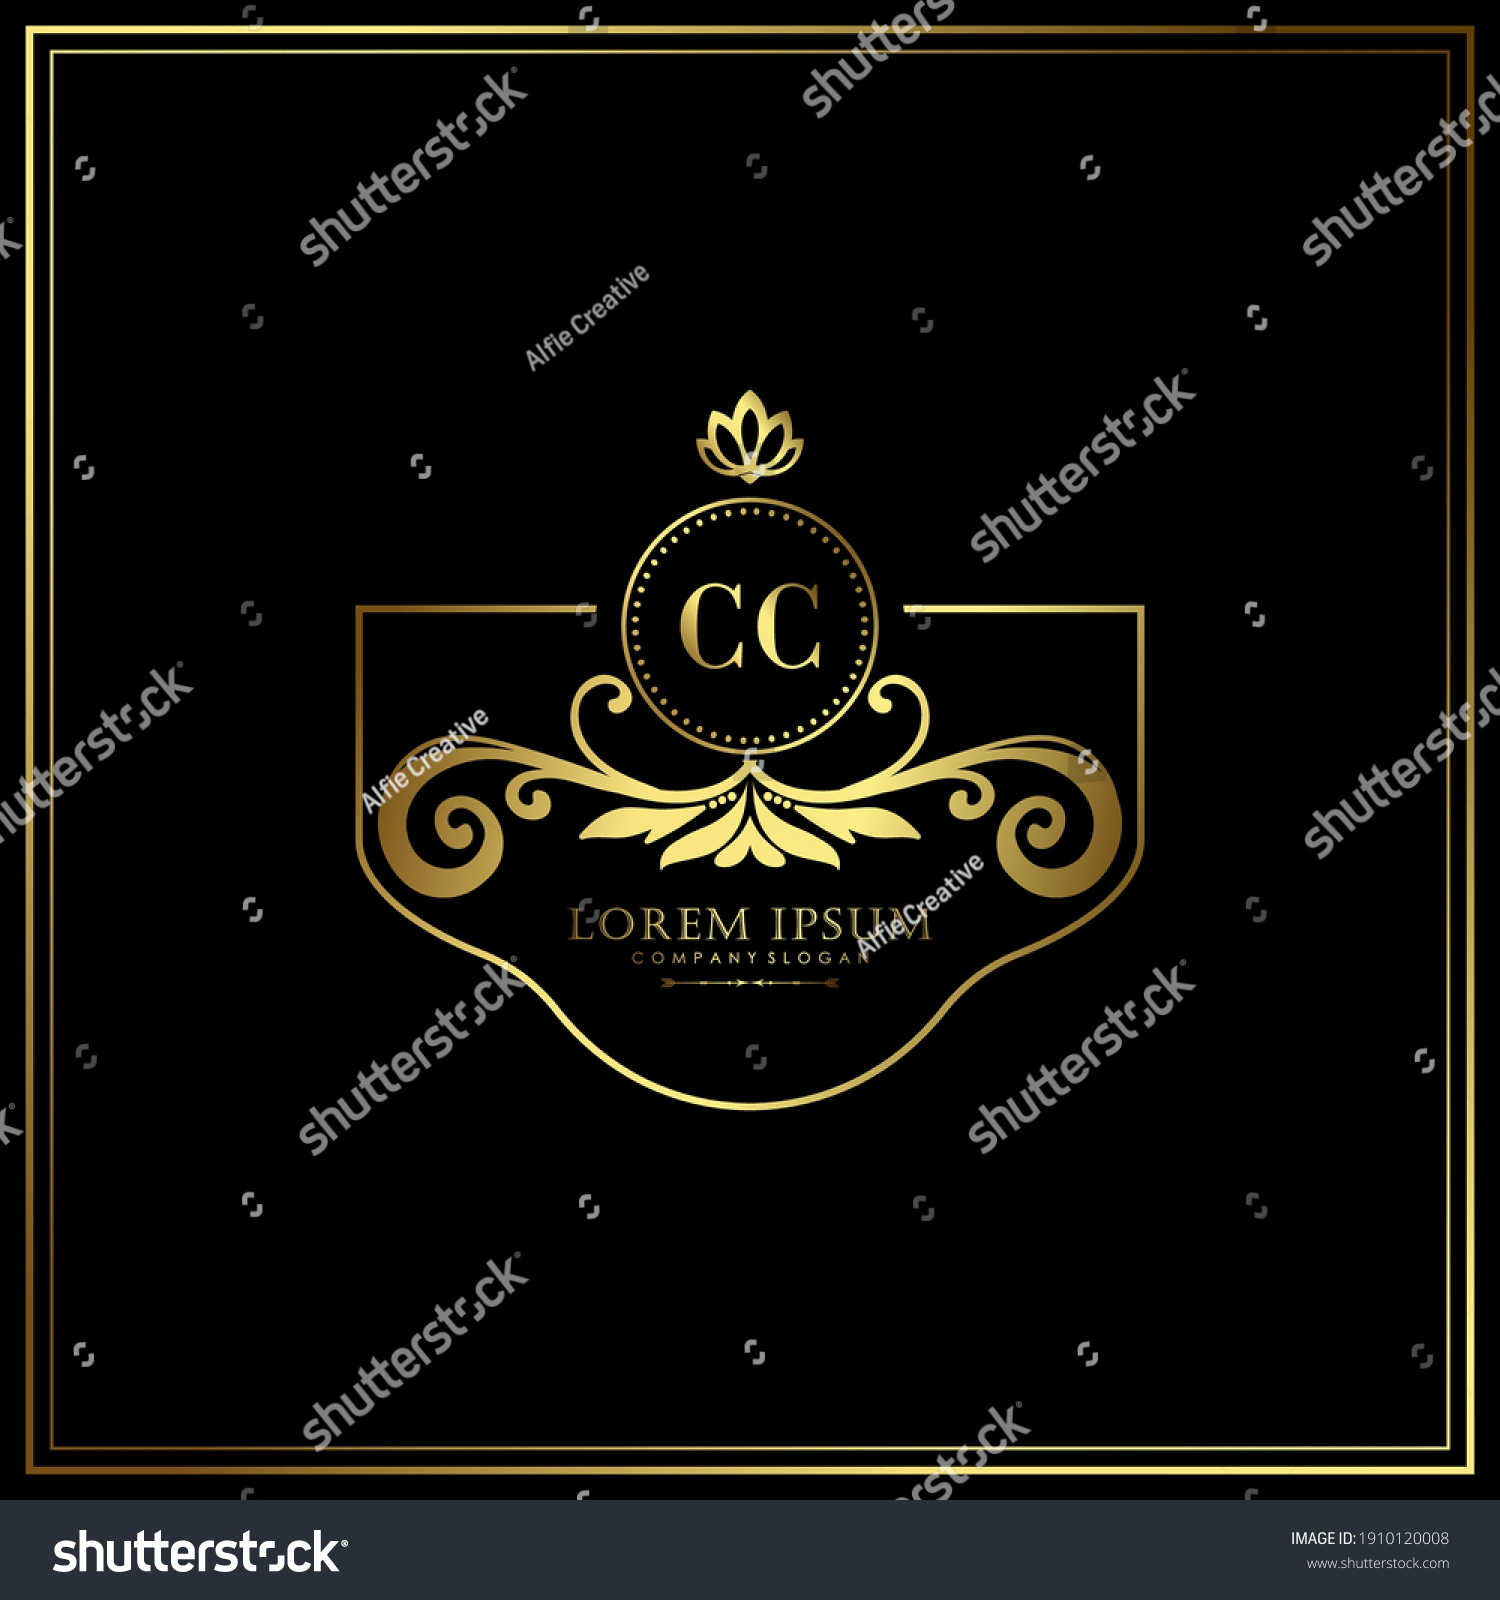 Cc Initial Letter Luxury Logo Template Stock Vector (Royalty Free ...